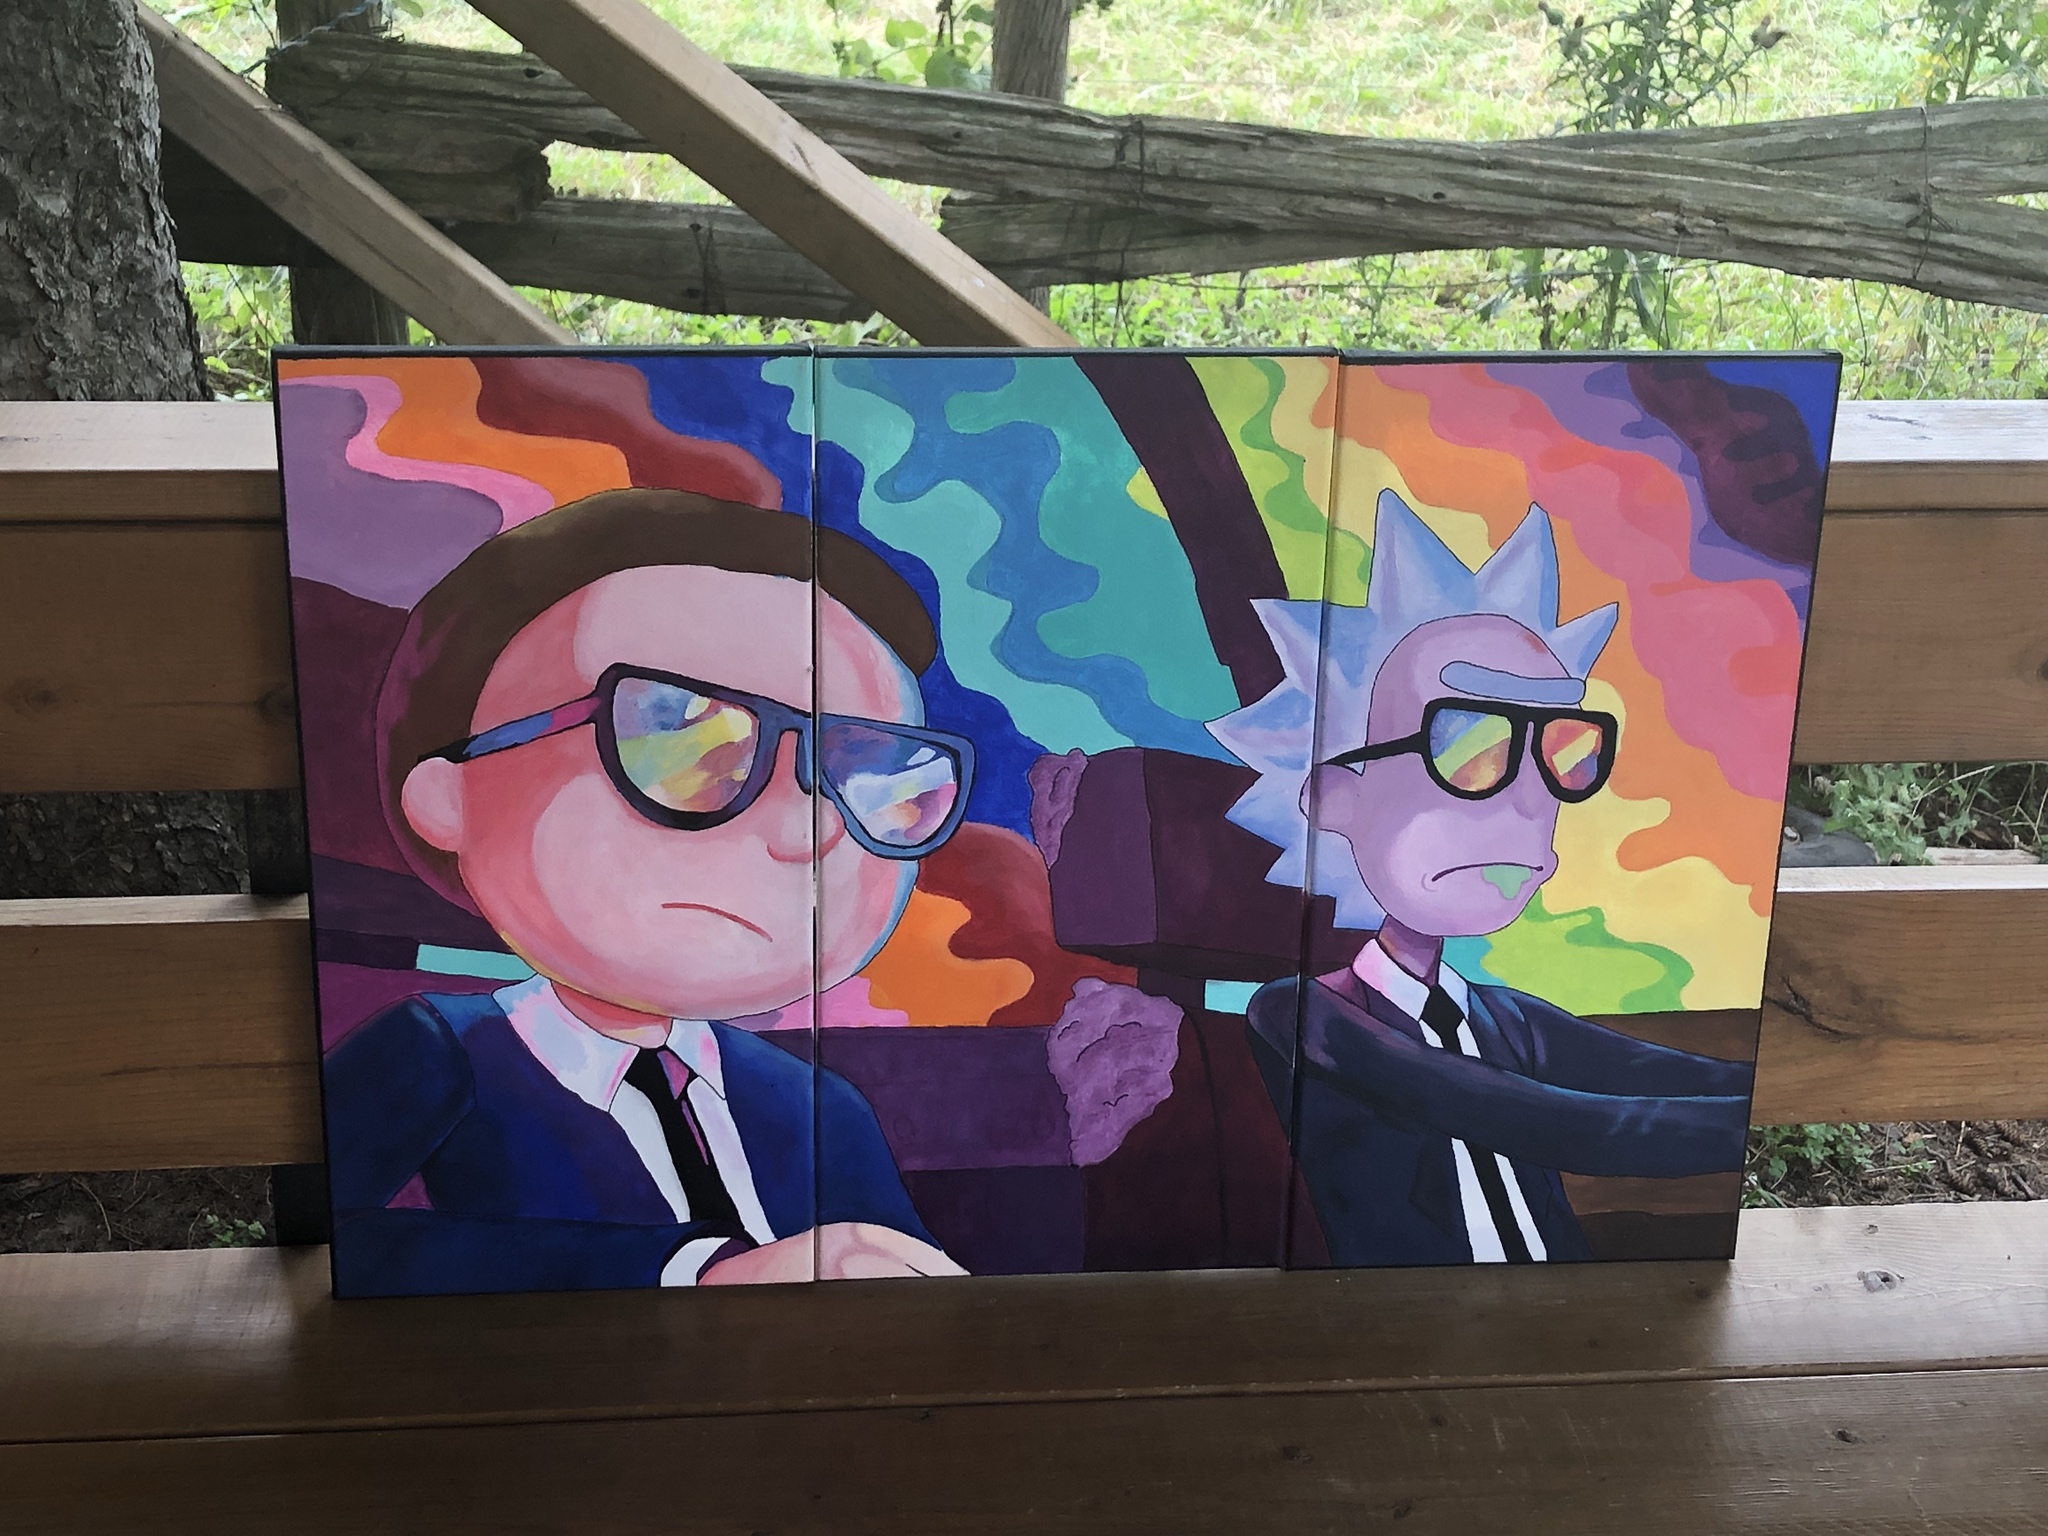 How Many Of You Find Rick And Morty Painting Lovable?